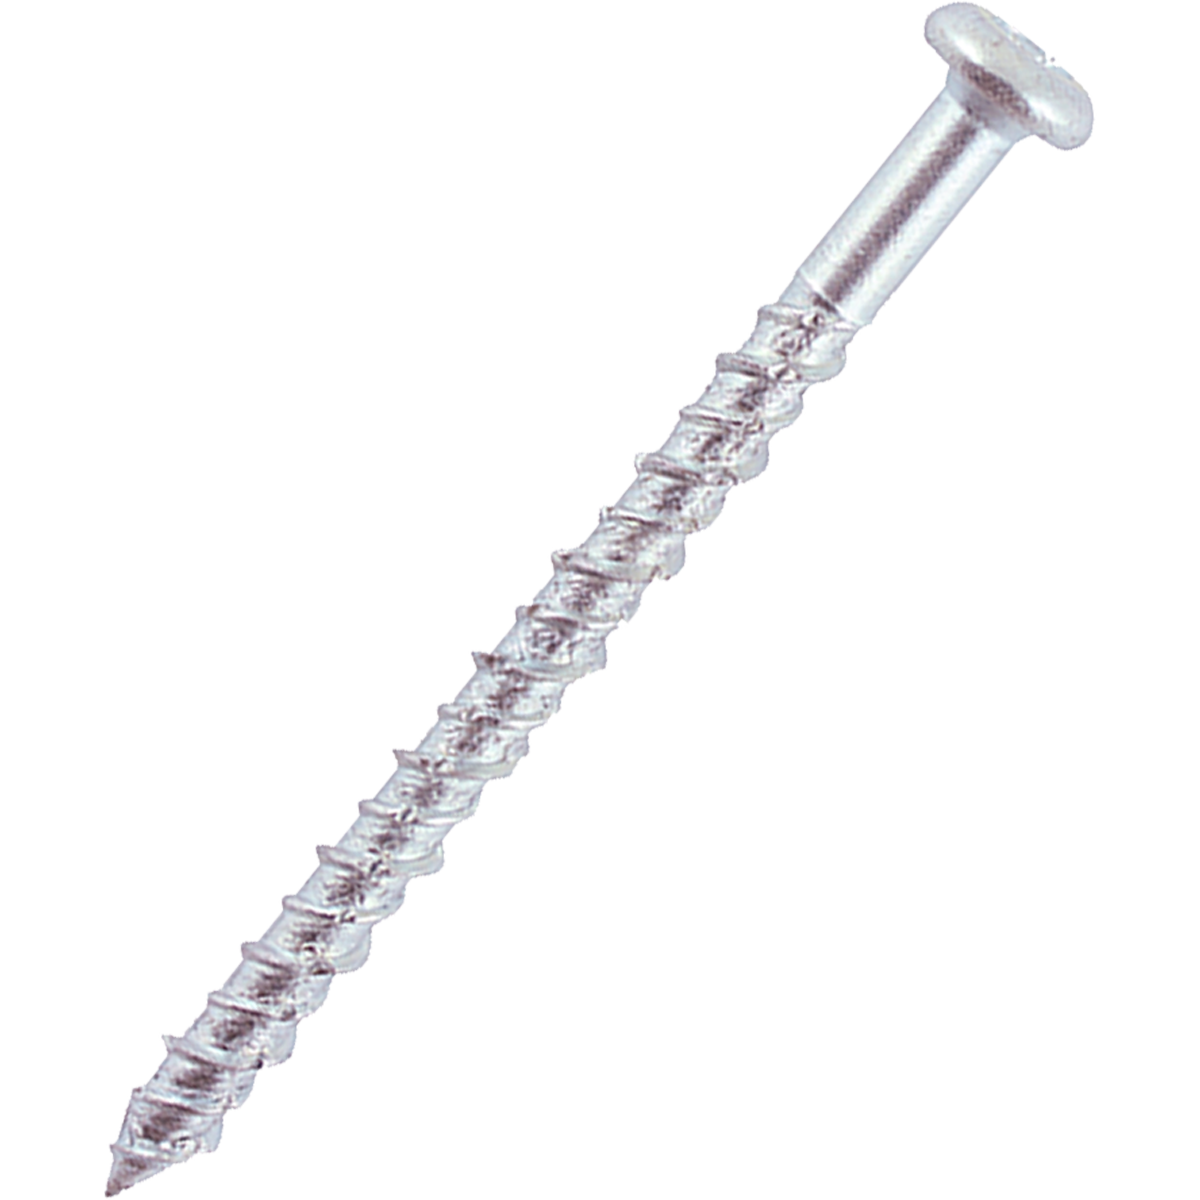 Masonry screws with a pan head. Effective fixing of ironmongery to materials such as concrete, stone and brick